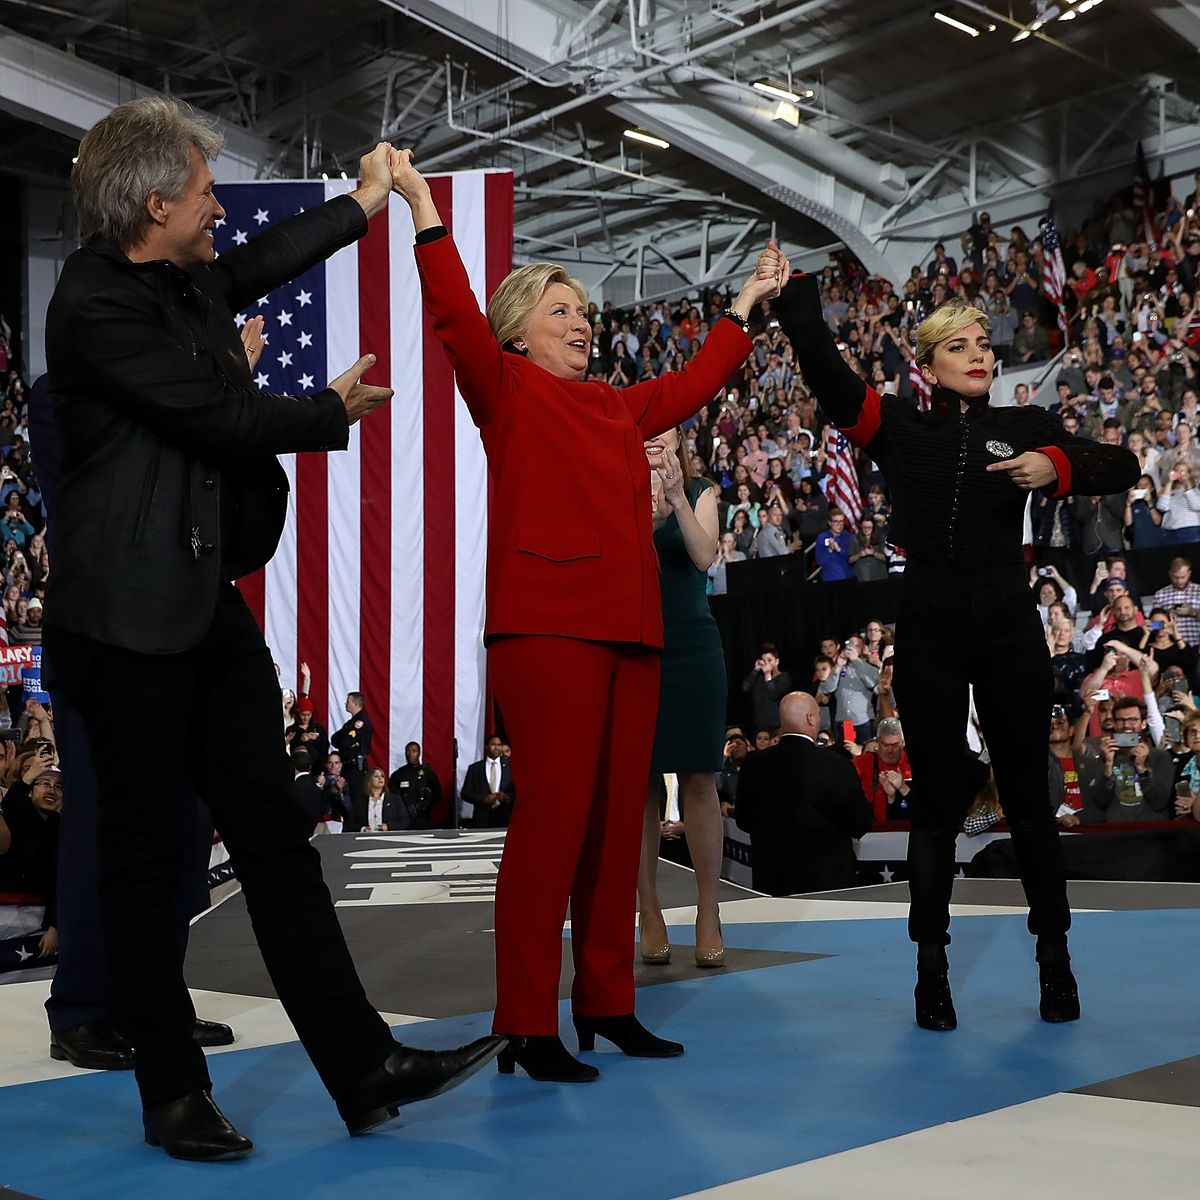 Vader circulatie premie Lady Gaga accidentally dressed a bit like a Nazi at Hillary Clinton's  Presidential rally